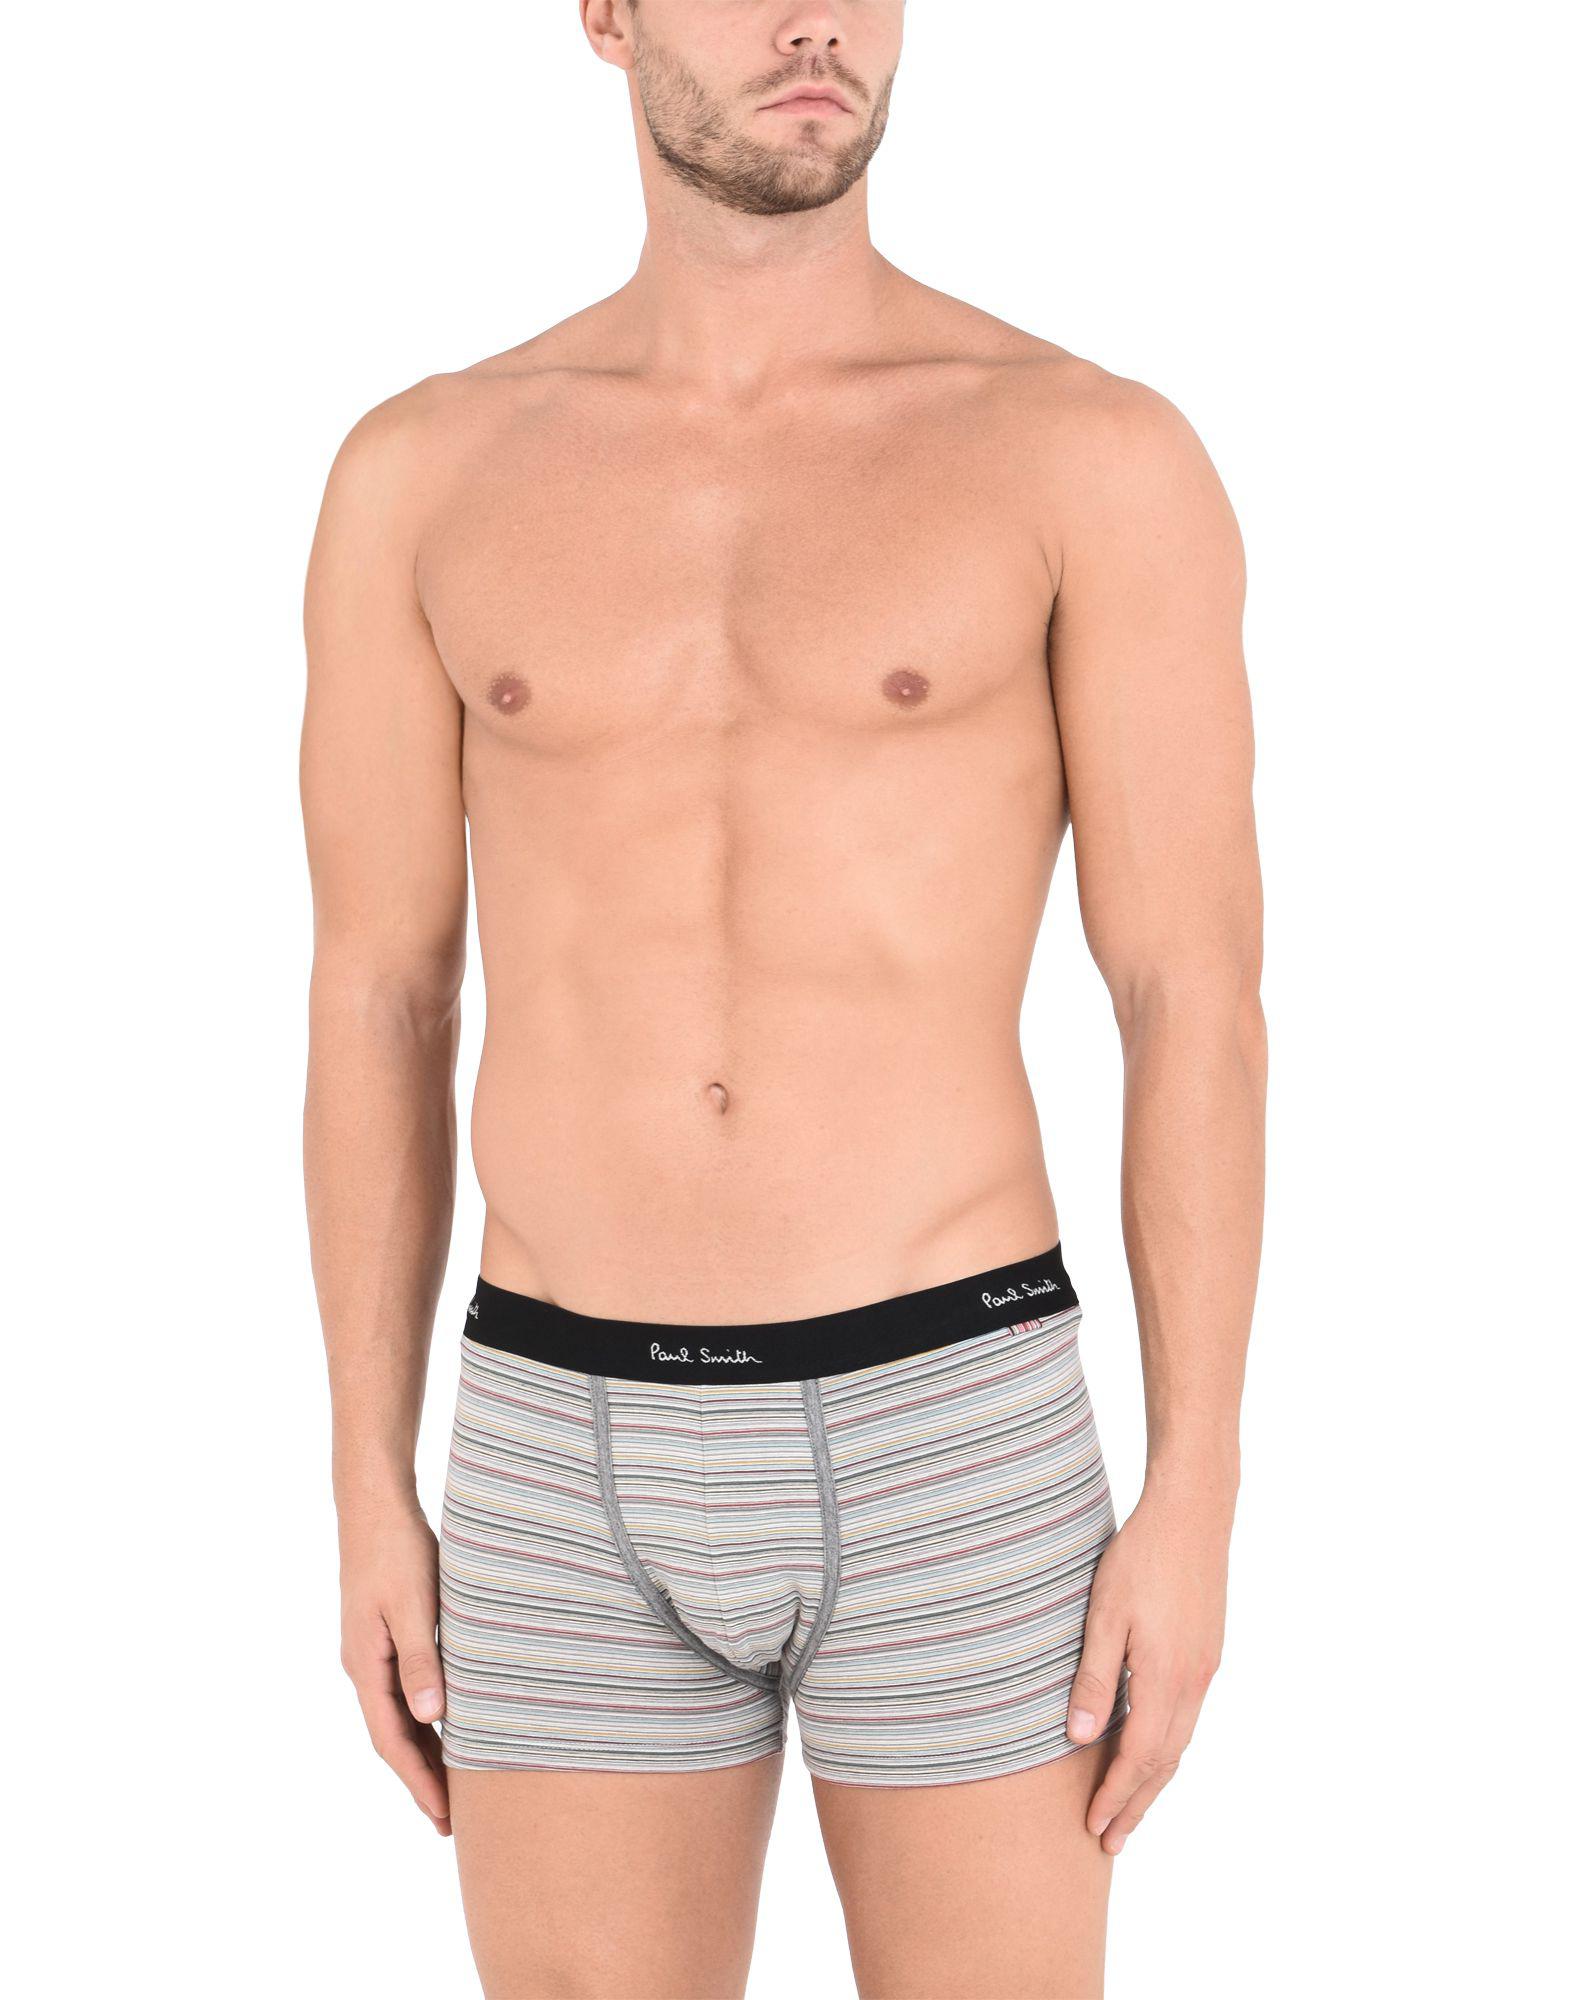 Lyst - Paul smith Boxer in Gray for Men